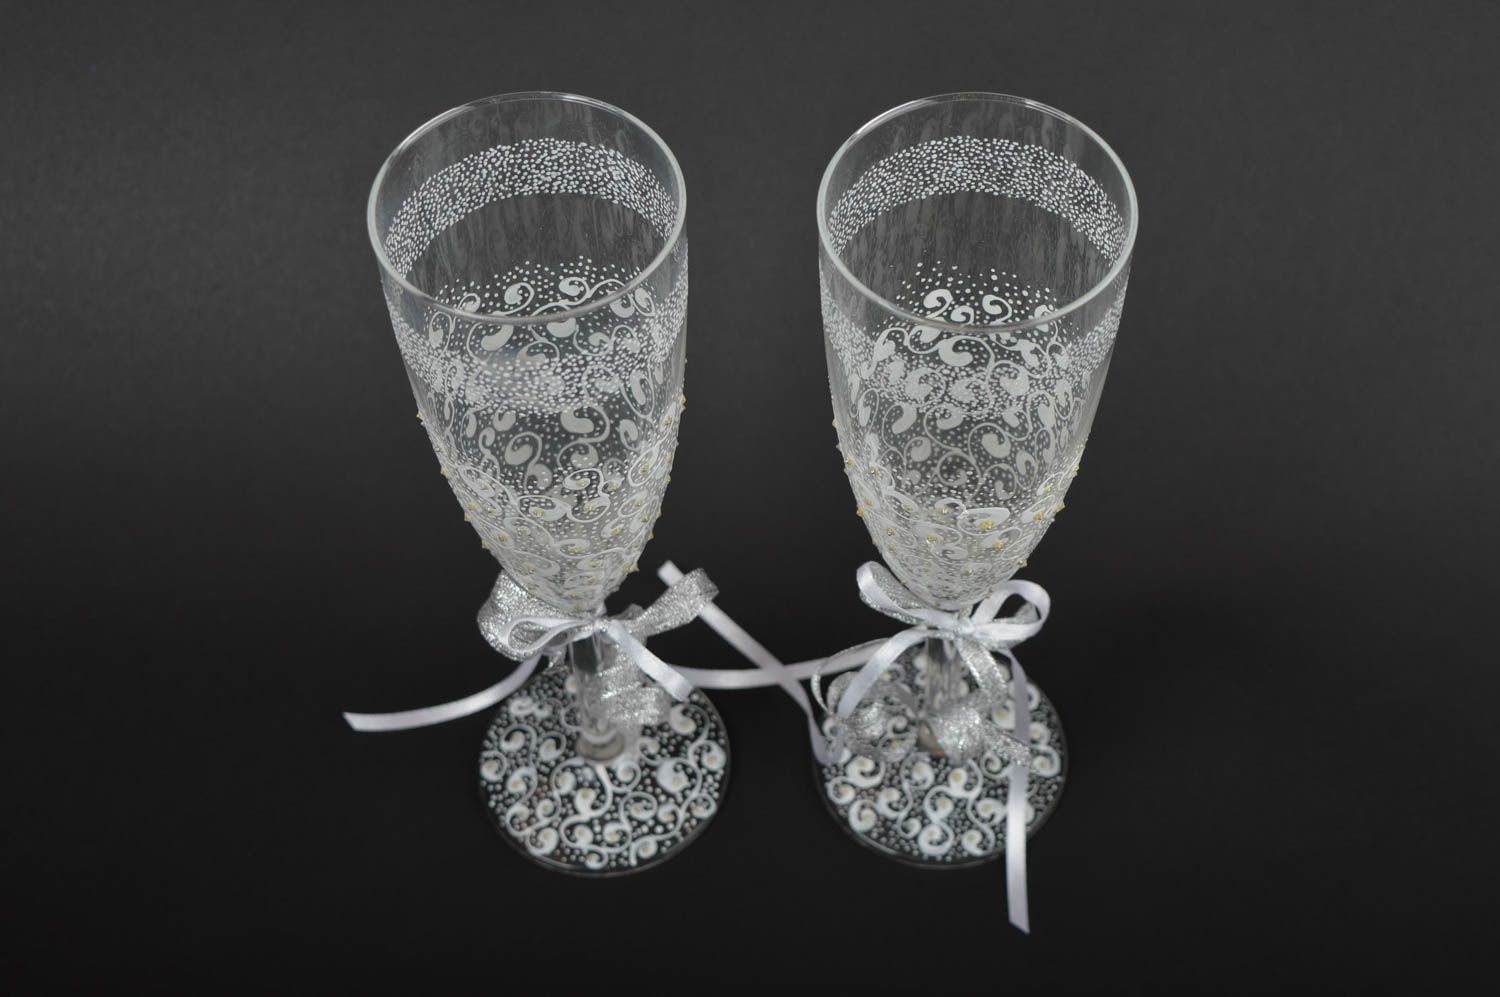 Handmade glasses unusual glasses for newlyweds wedding accessories gift ideas photo 3